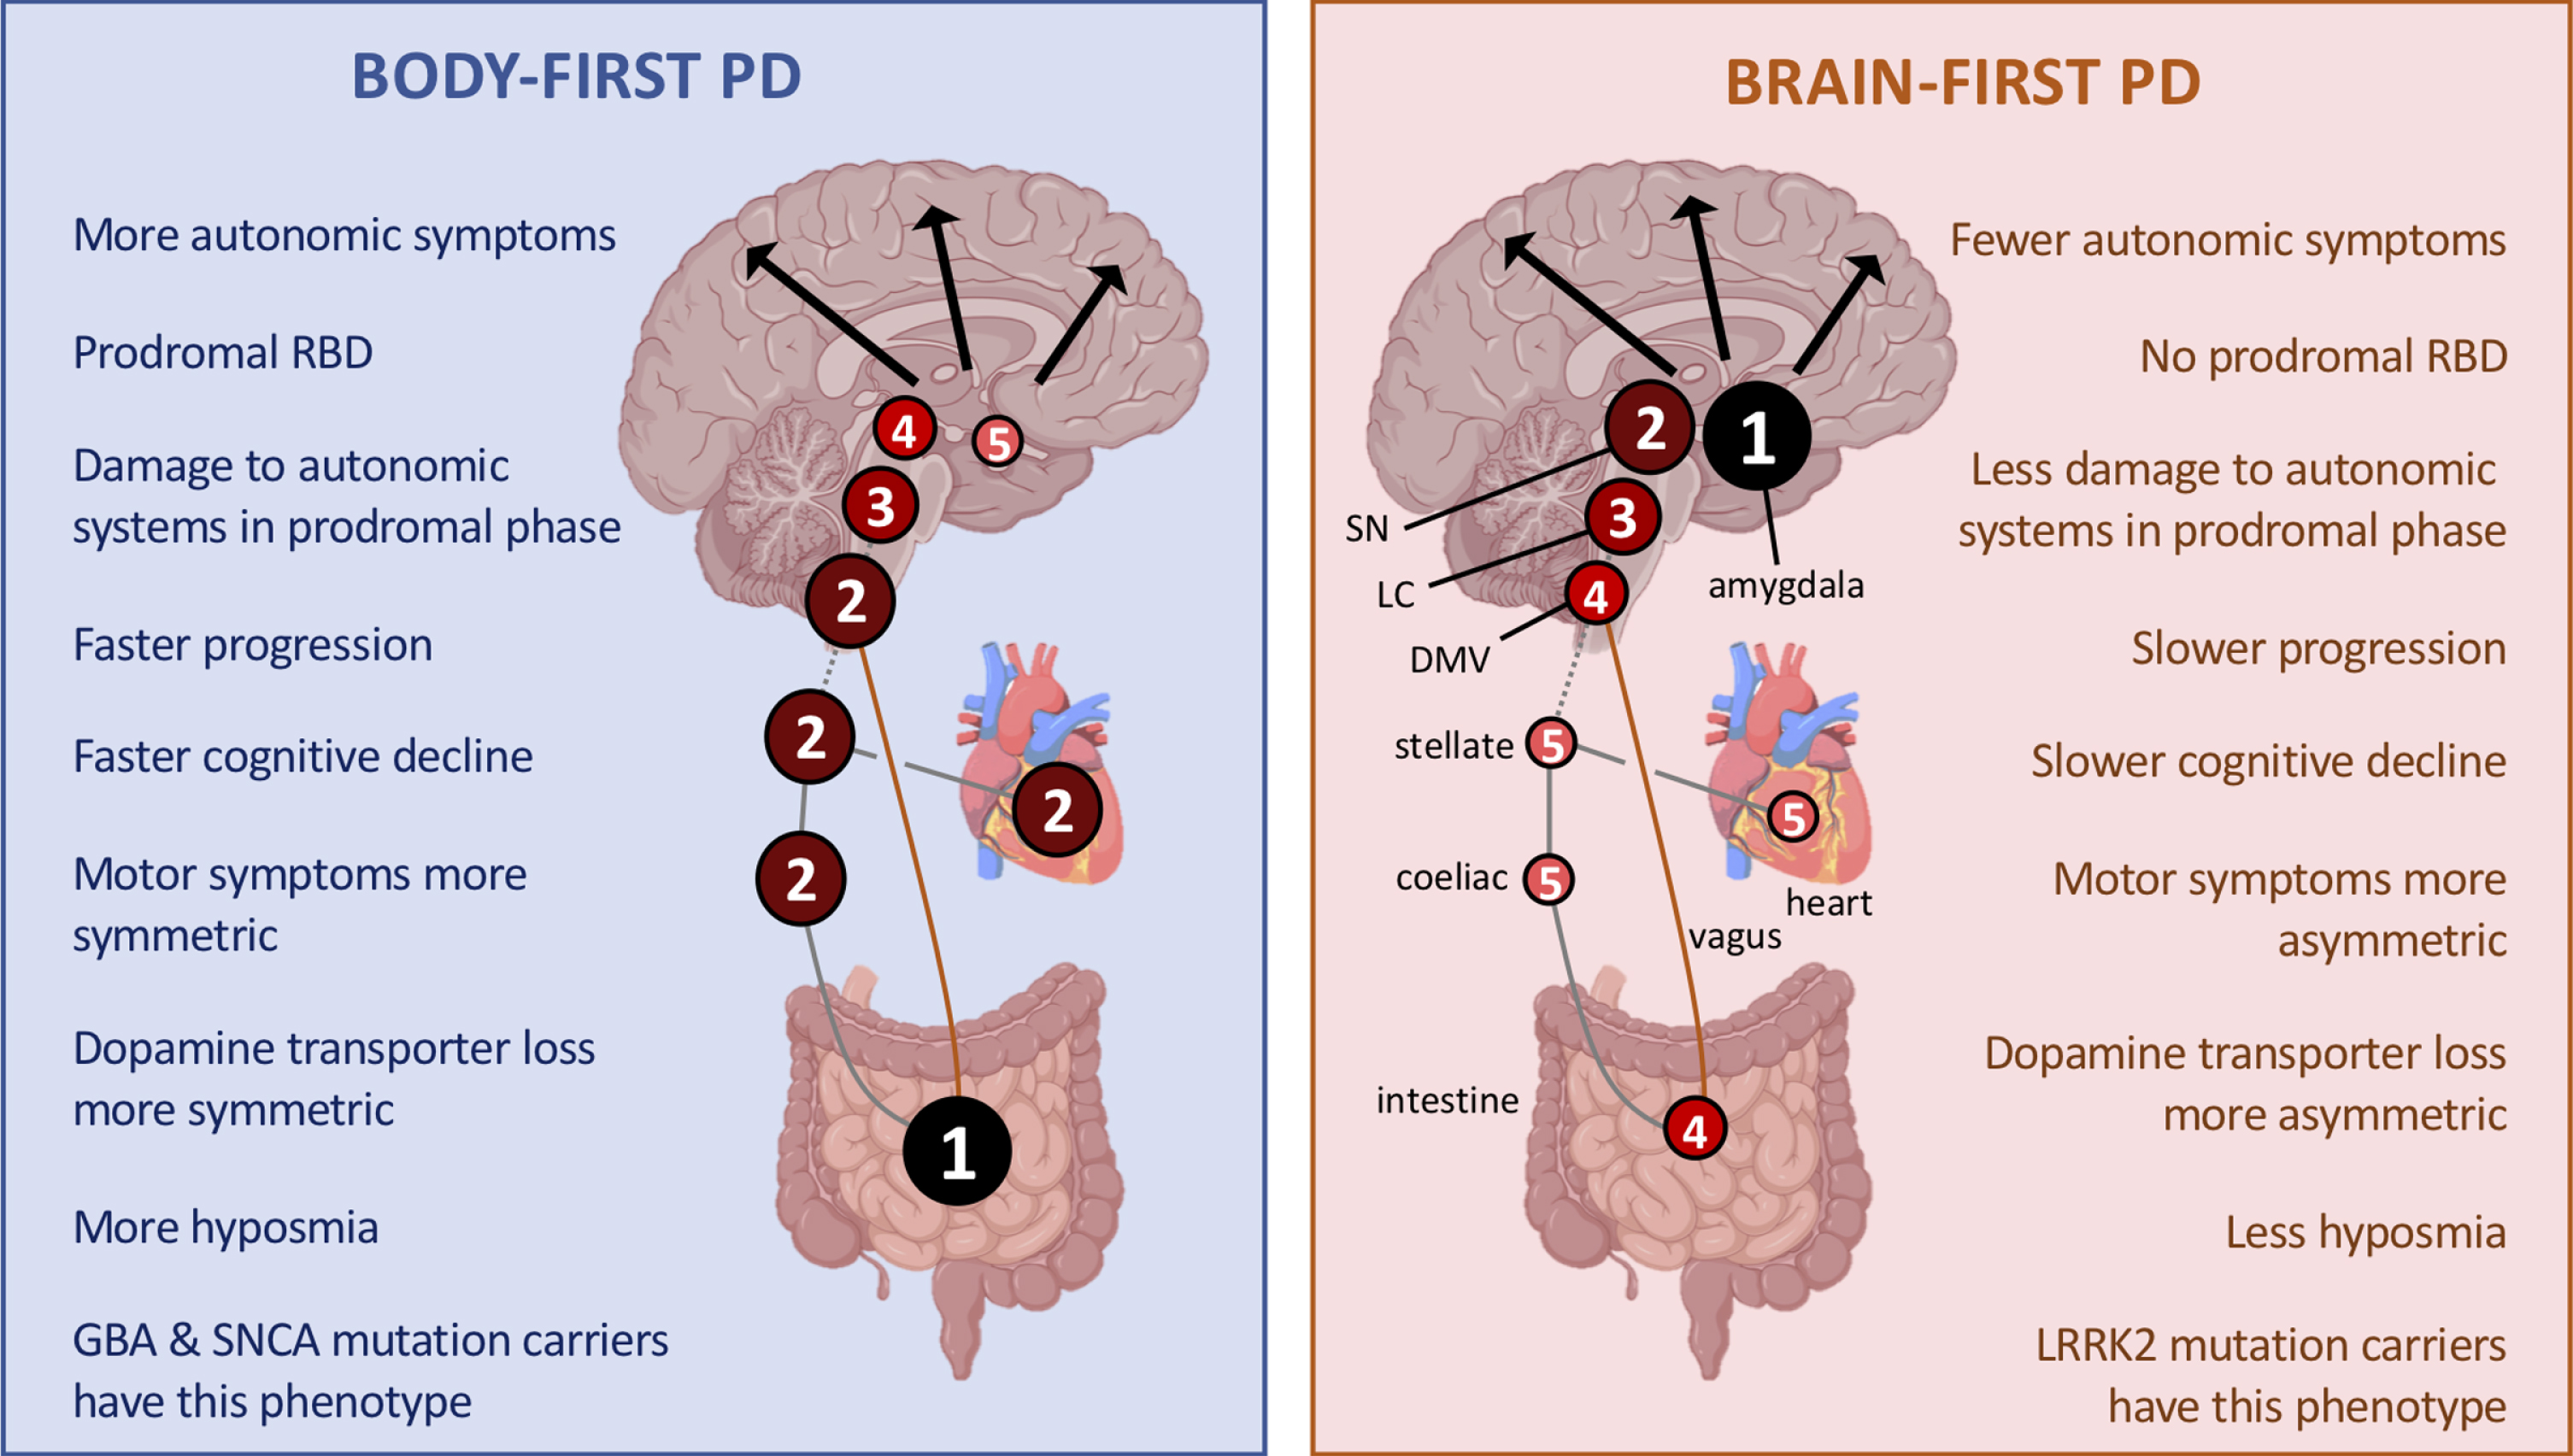 In the body-first subtype of PD, the initial α-synuclein pathology presumably originates in the enteric or autonomic nervous system and spreads to the CNS via the vagus and sympathetic connectome. A brainstem-predominant profile of Lewy pathology follows. These patients develop RBD in the prodromal phase, have more autonomic symptoms, significant hyposmia, faster motor and non-motor progression, and more rapid cognitive decline. When parkinsonism emerges, it is (on average) more symmetric. In the brain-first subtype of PD, the initial α-synuclein pathology presumably originates in the amygdala or in closely connected structures such as the olfactory bulb. An amygdala-predominant profile of Lewy pathology then develops. These patients are RBD-negative in the prodromal phase, have fewer autonomic symptoms, less frequent hyposmia, slower motor and non-motor progression, and less rapid cognitive decline. When parkinsonism emerges, it is most often asymmetric. Different genetic mutations seem to be associated with one or the other of these phenotypes [18]. Both figures illustrate the site of initial α-synuclein pathology (1) and the subsequent spatial-temporal sequence of progressive Lewy pathology (2–5).